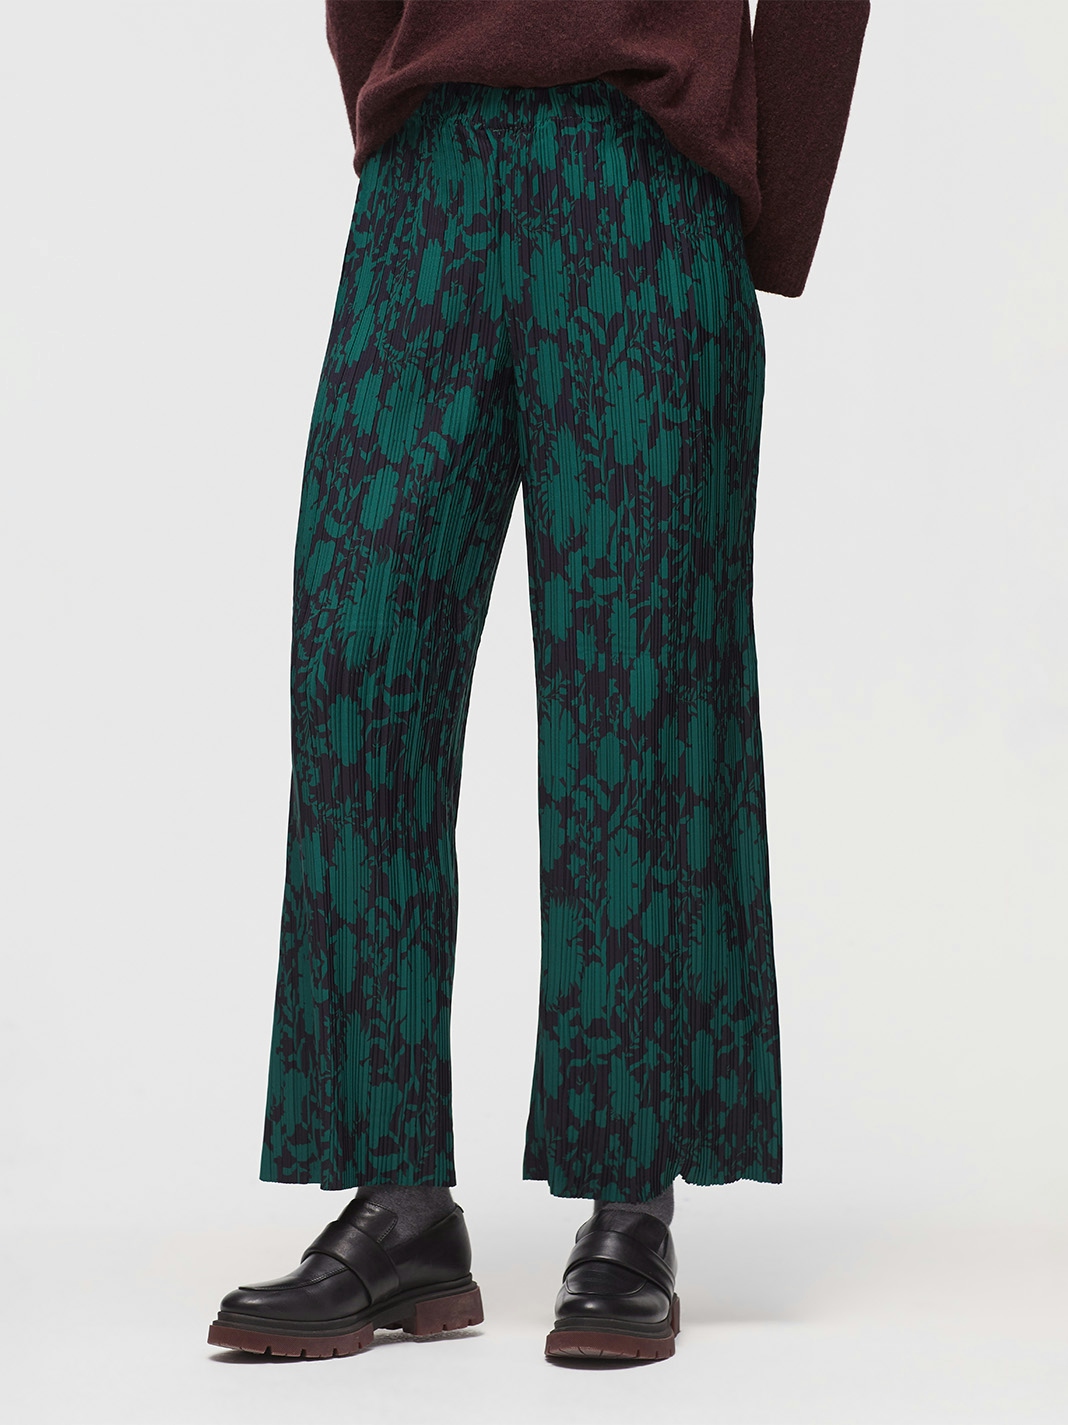 Flower Shapes trousers